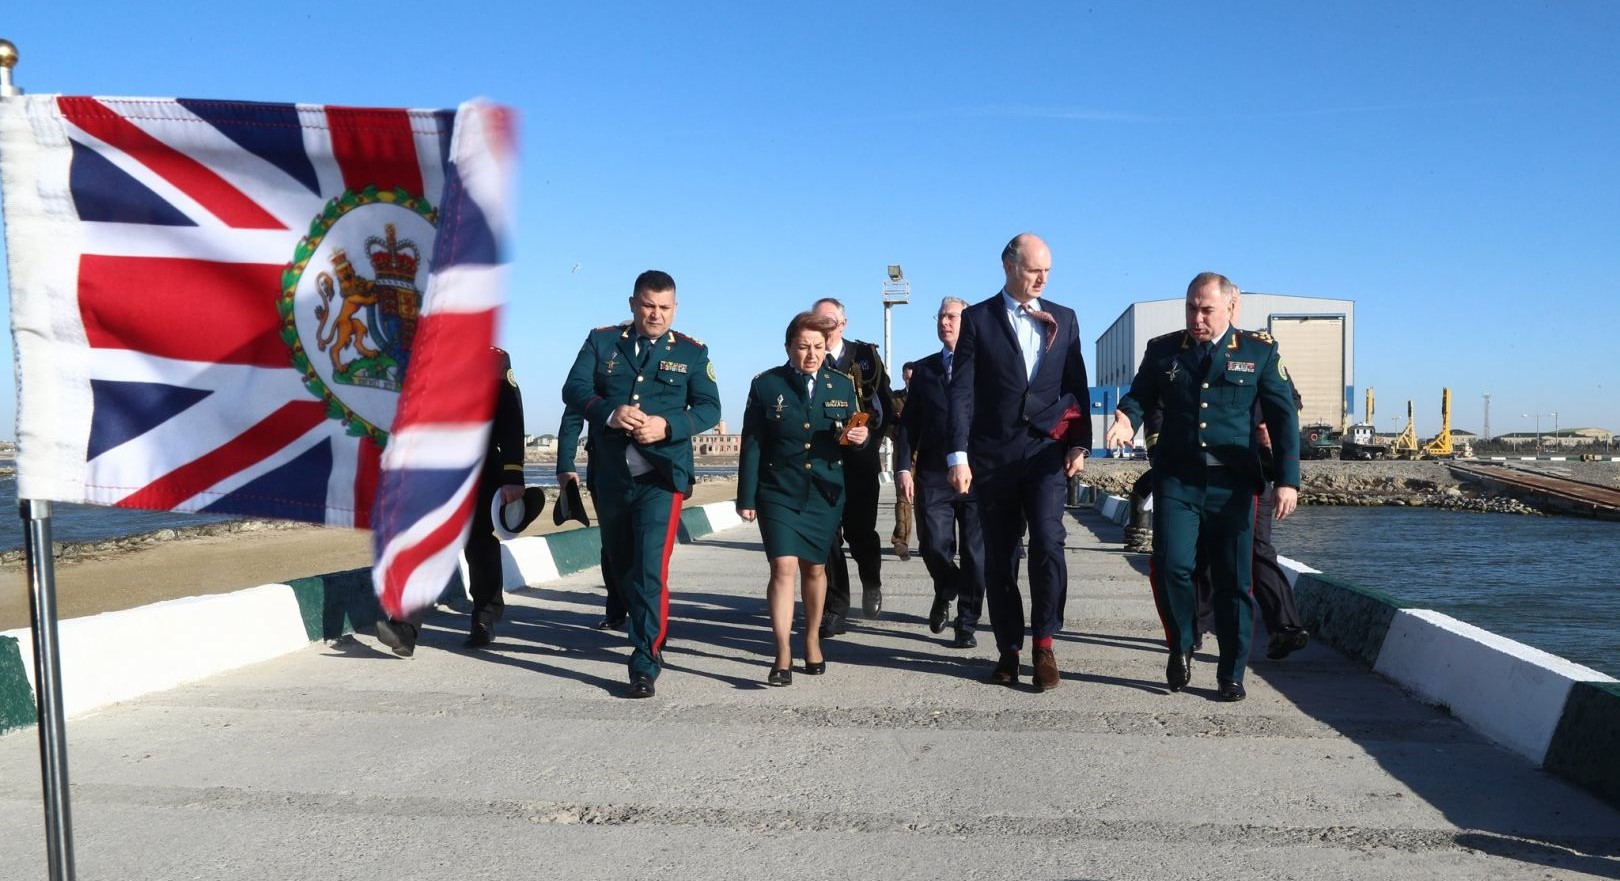 UK Minister of State for Europe arrives in Azerbaijan